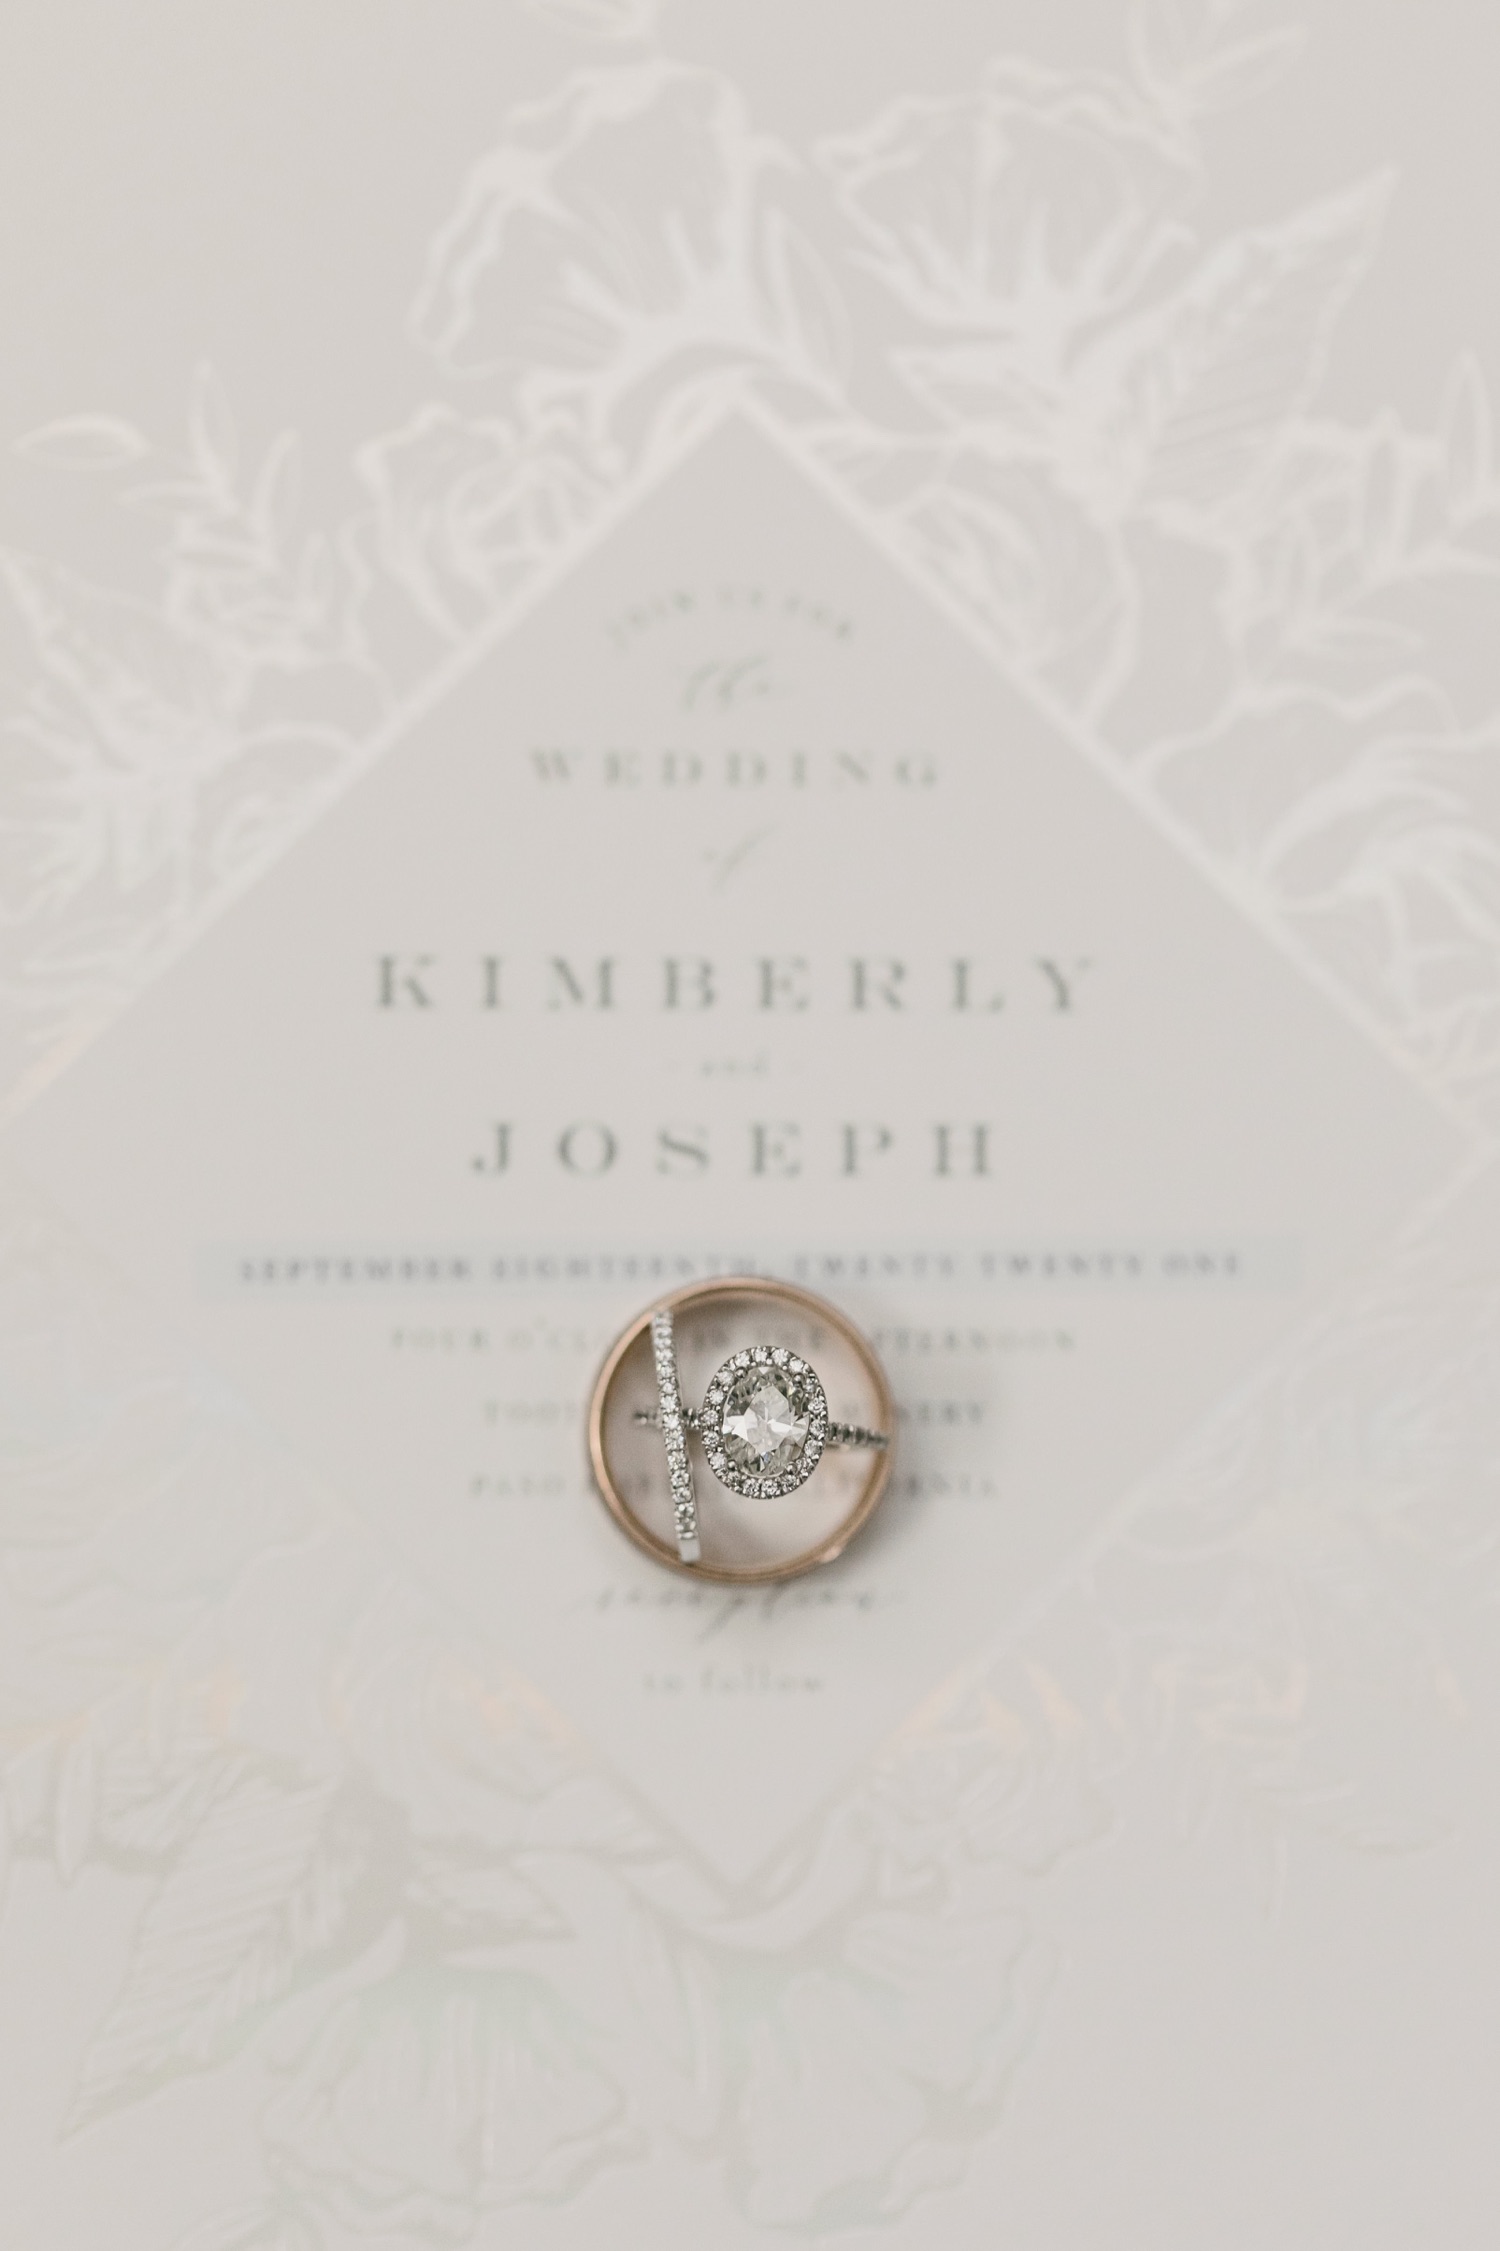 Photo of wedding rings on top of a wedding invite in Paso Robles, California